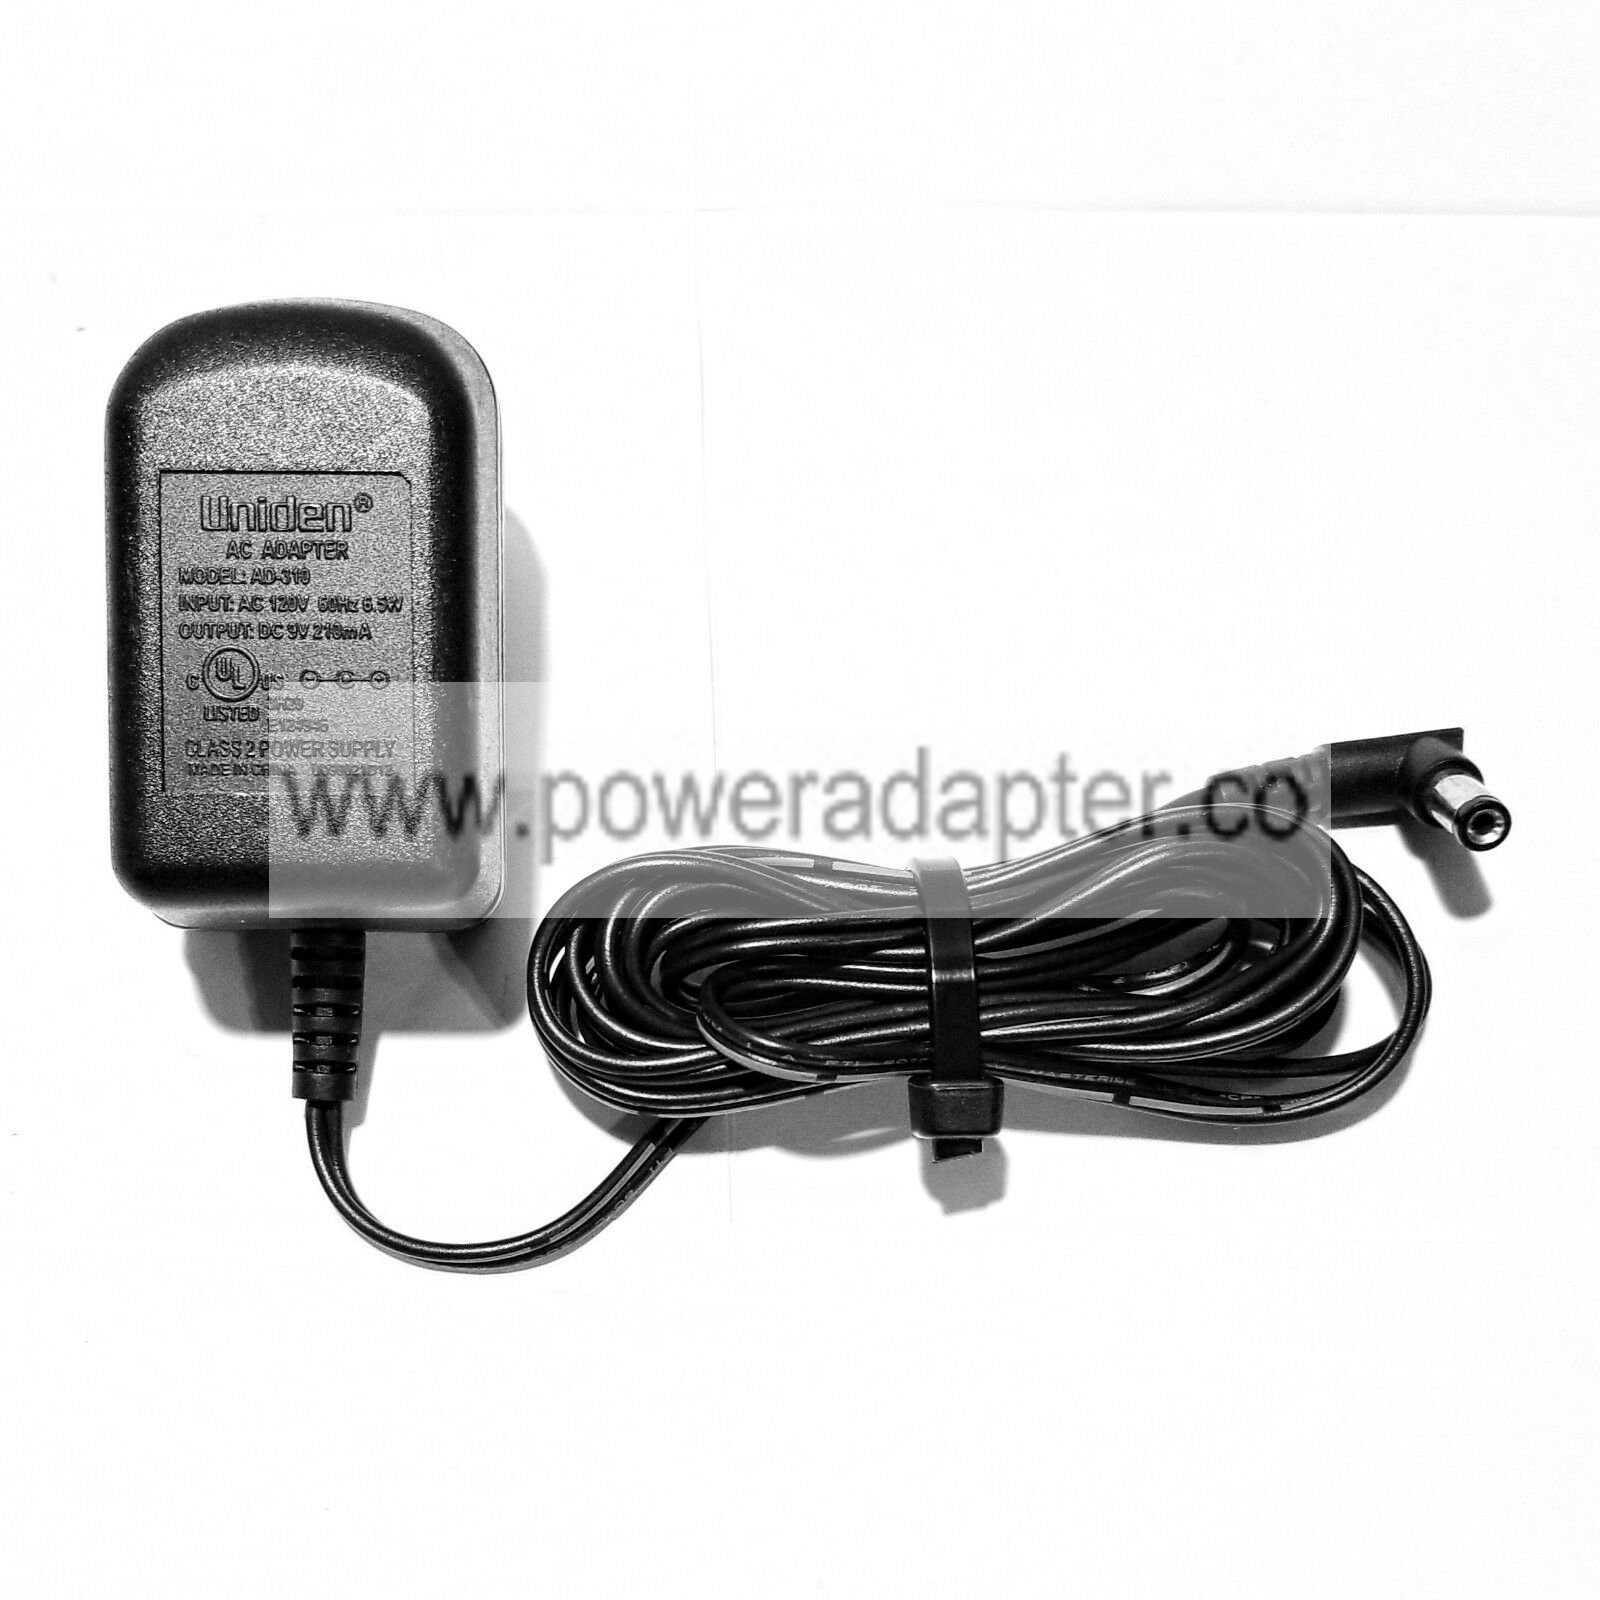 Uniden AD-0005 AC Power Supply Adapter Adaptor Charger 9V 210mA Uniden AC AD-0005 Adapter Charger Tested and in great - Click Image to Close